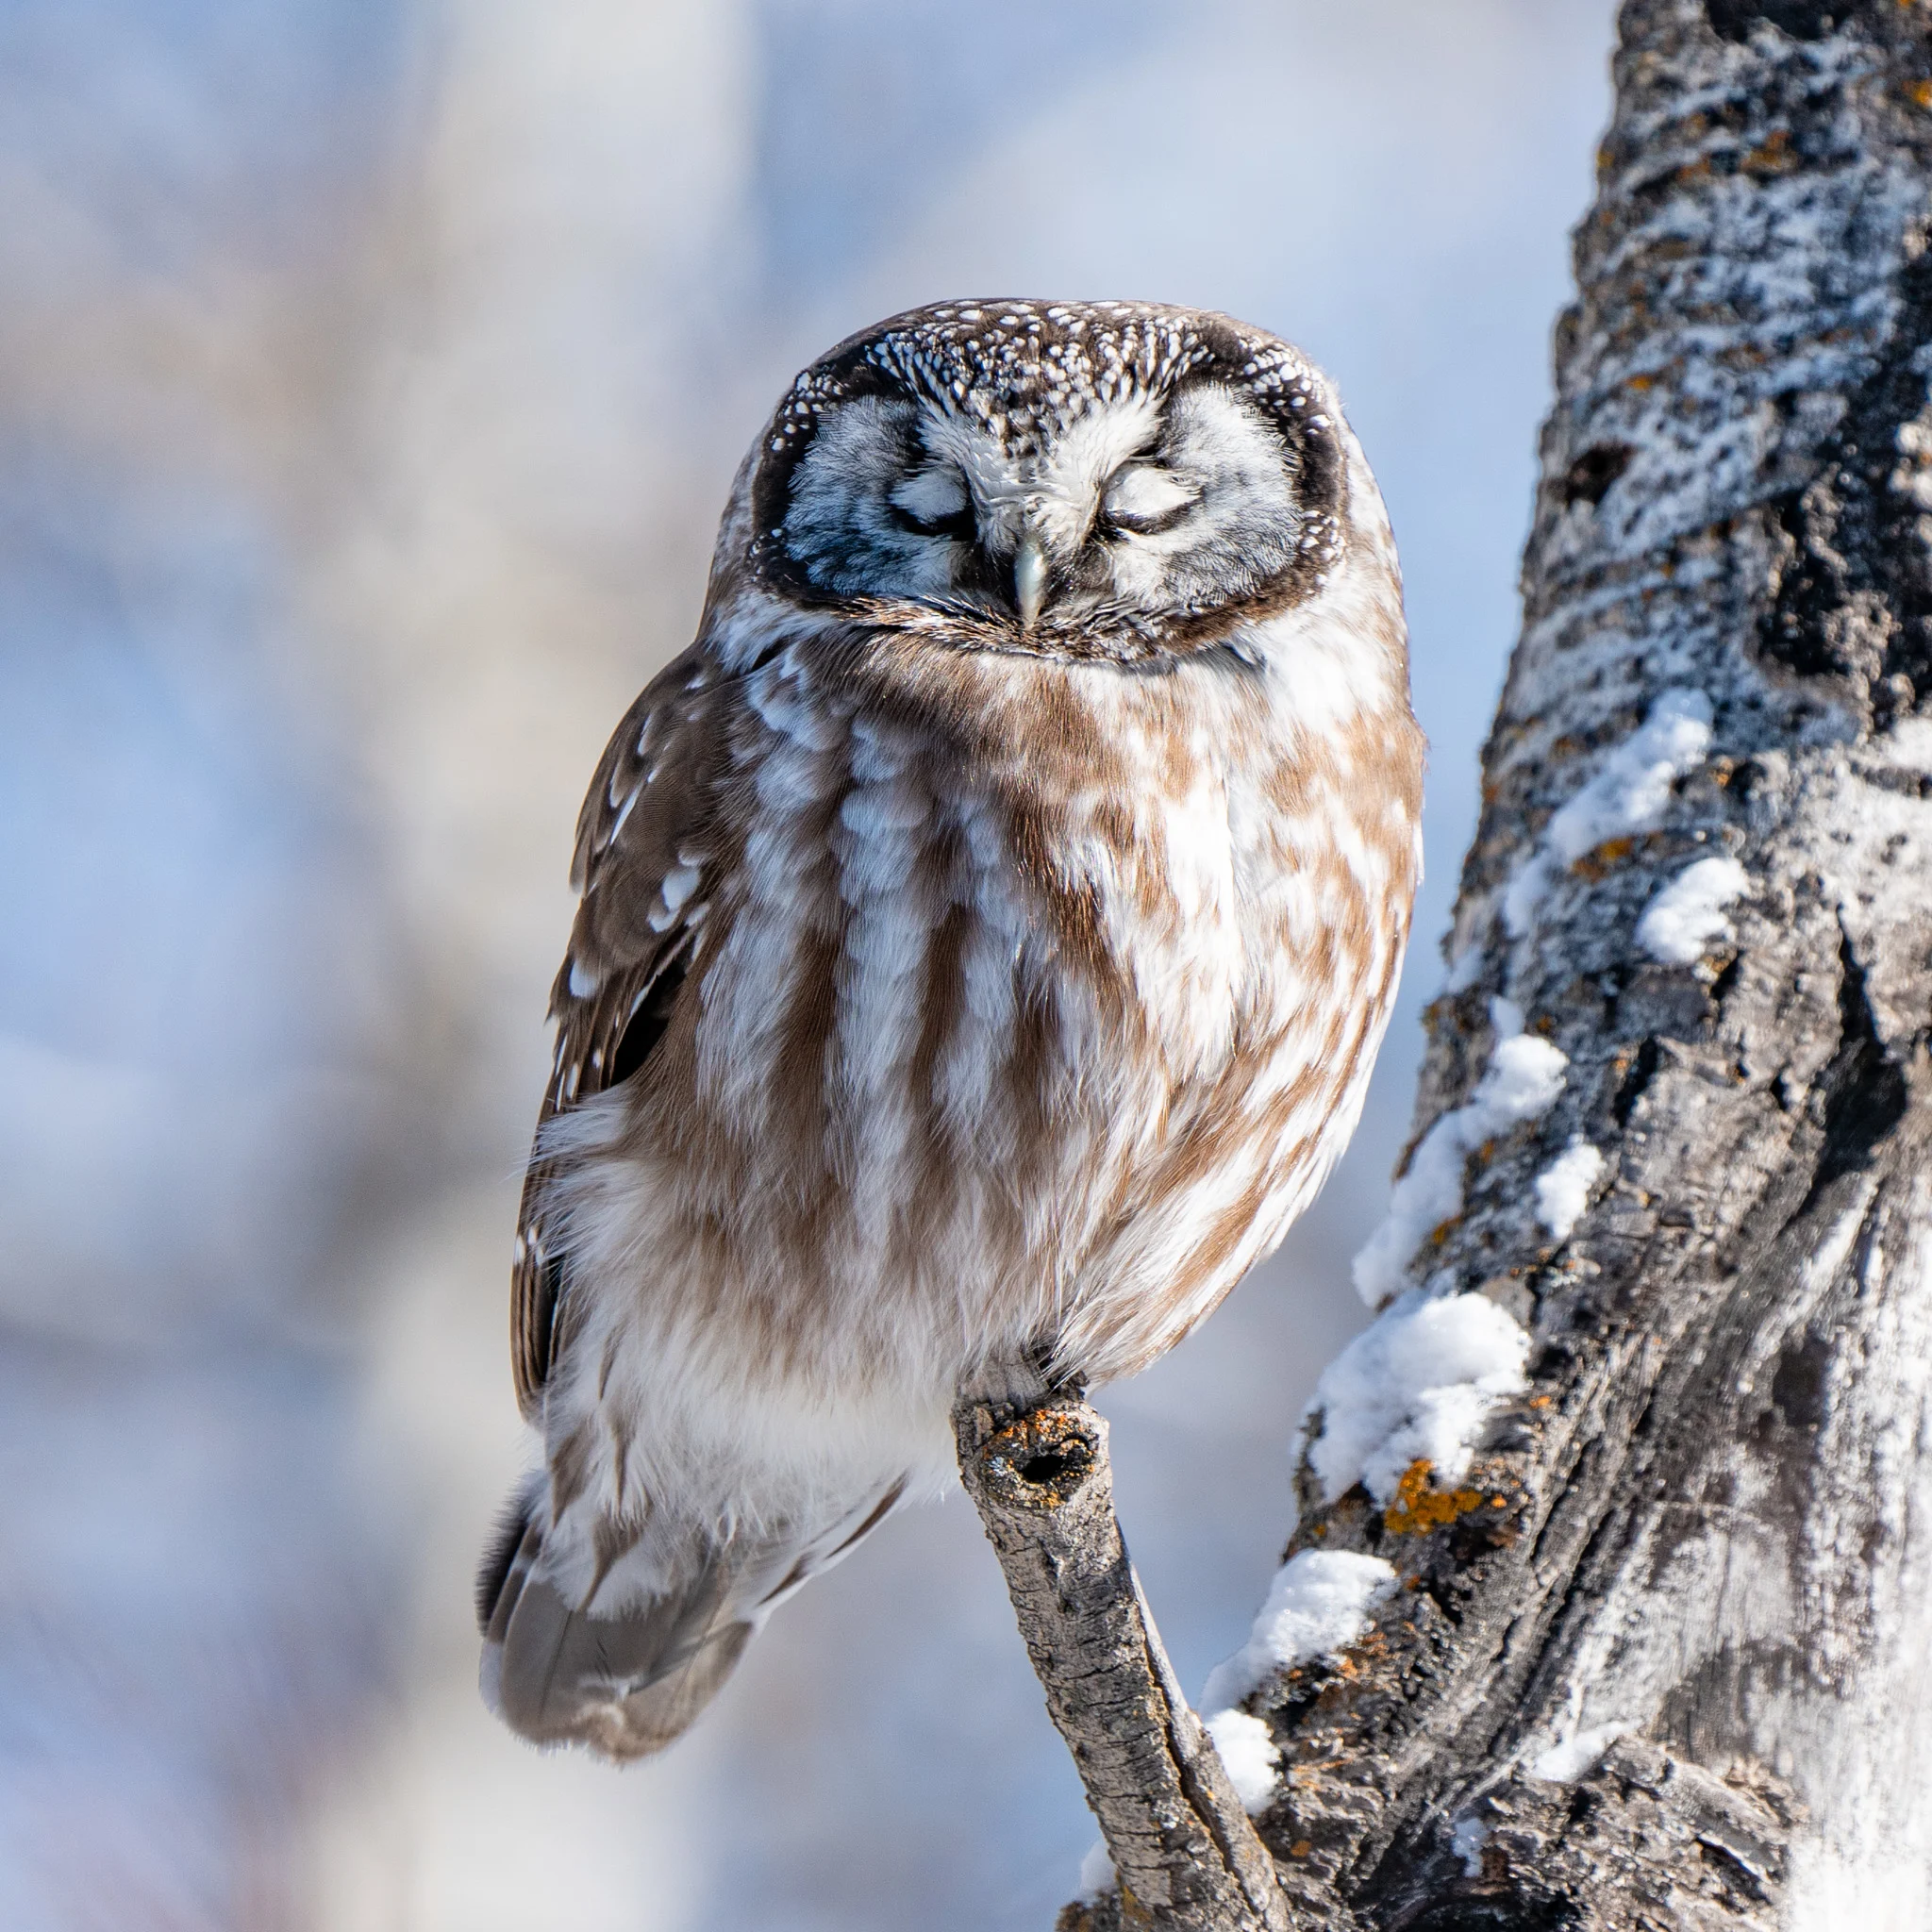 Boreal owl spotted in Calgary. Courtesy: Kyle Brittain